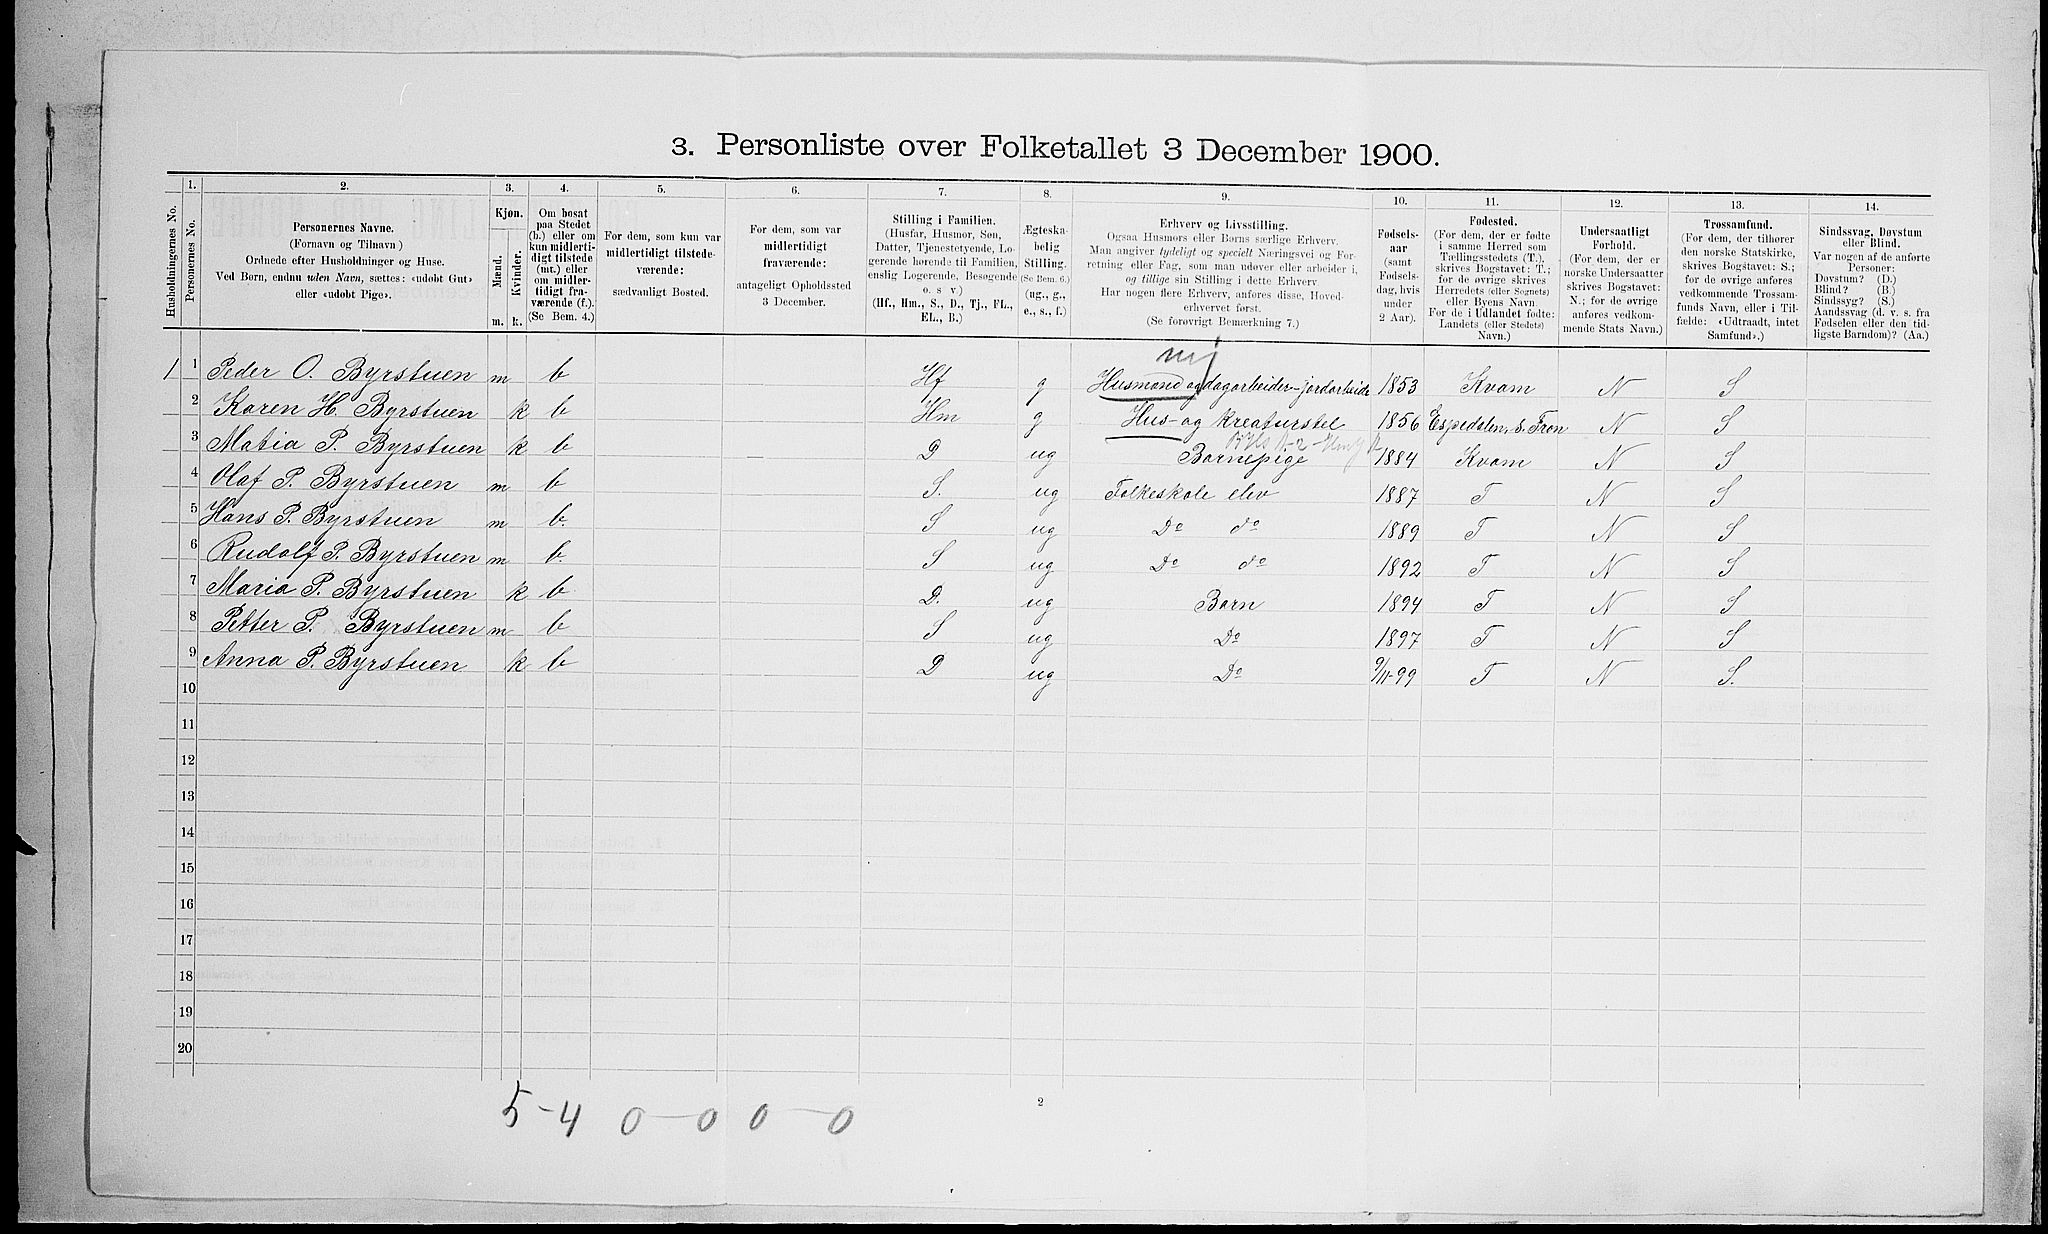 SAH, 1900 census for Nord-Fron, 1900, p. 809